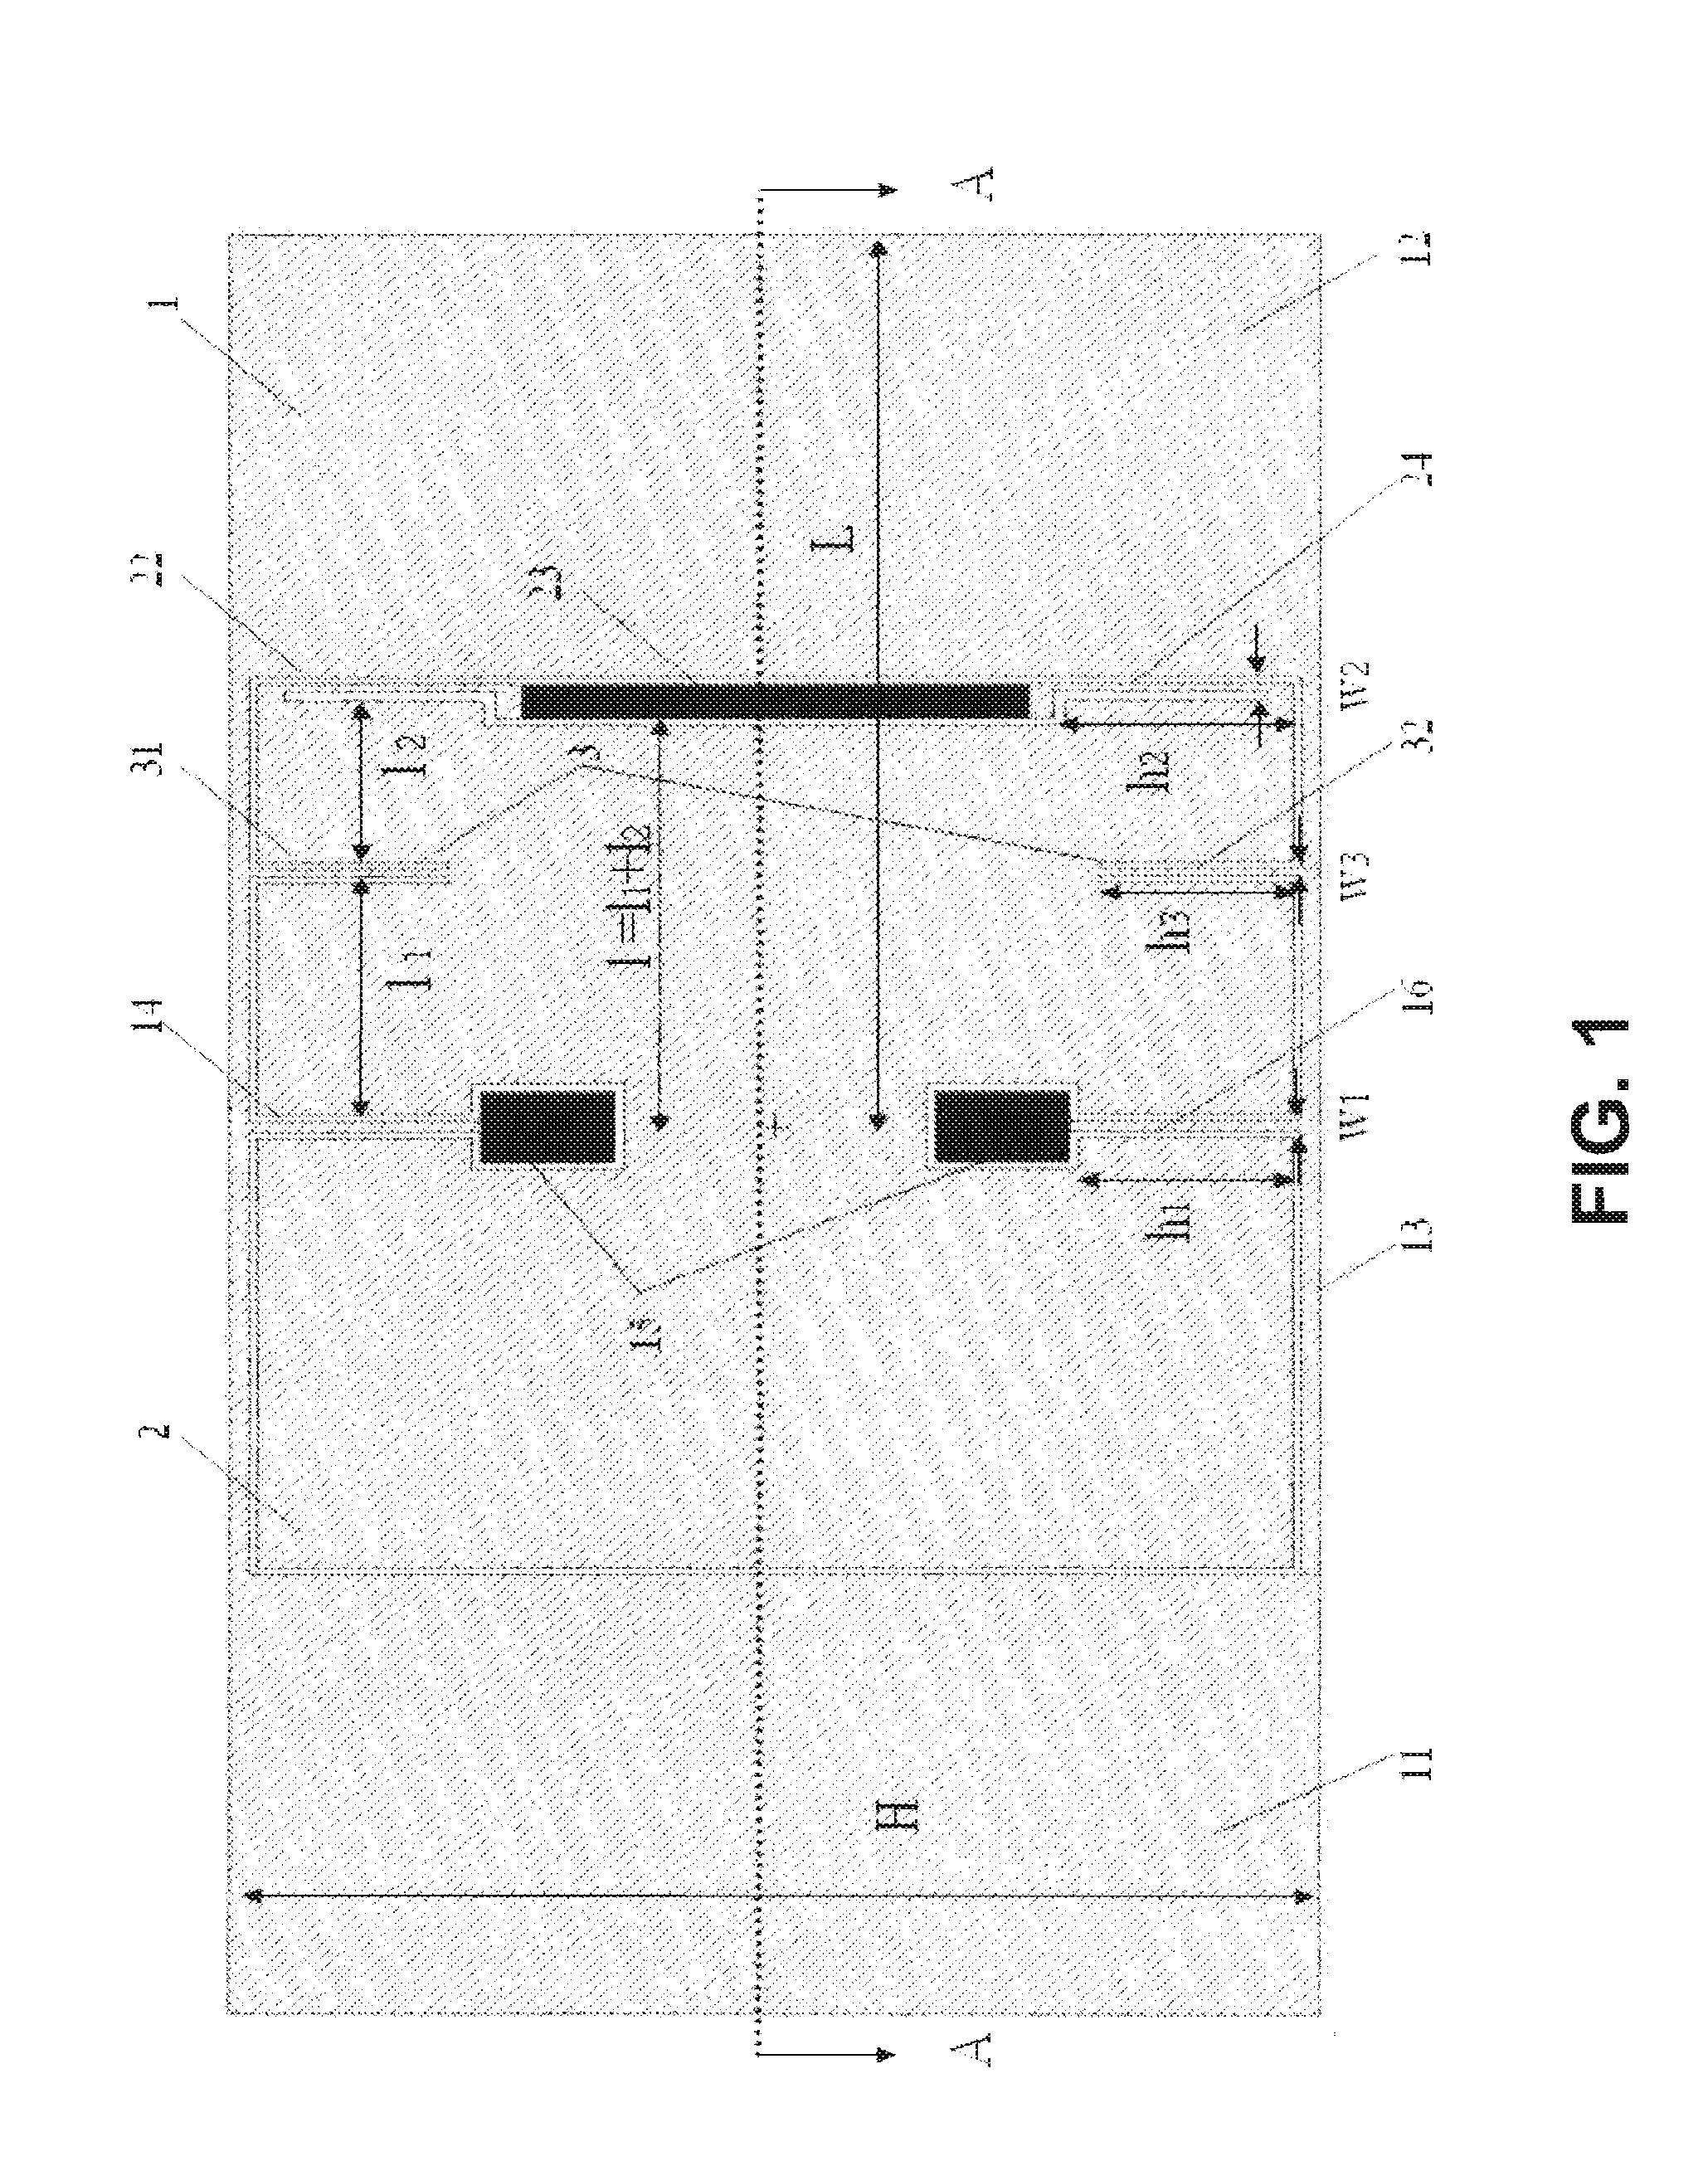 Z-axis capacitive accelerometer